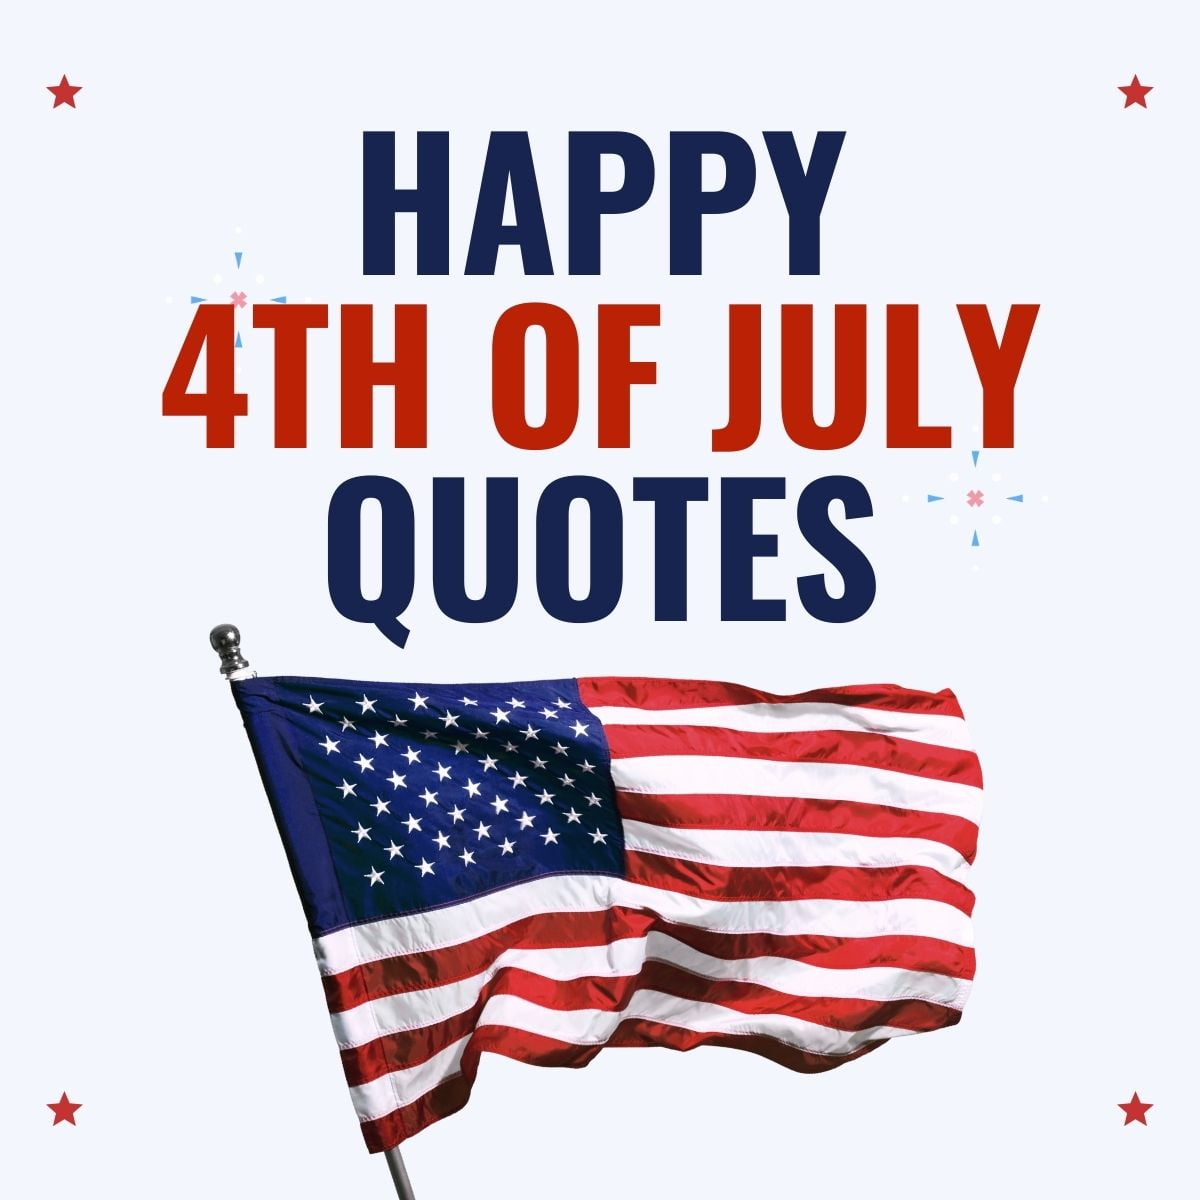 Festive and Inspiring Happy 4th of July Quotes